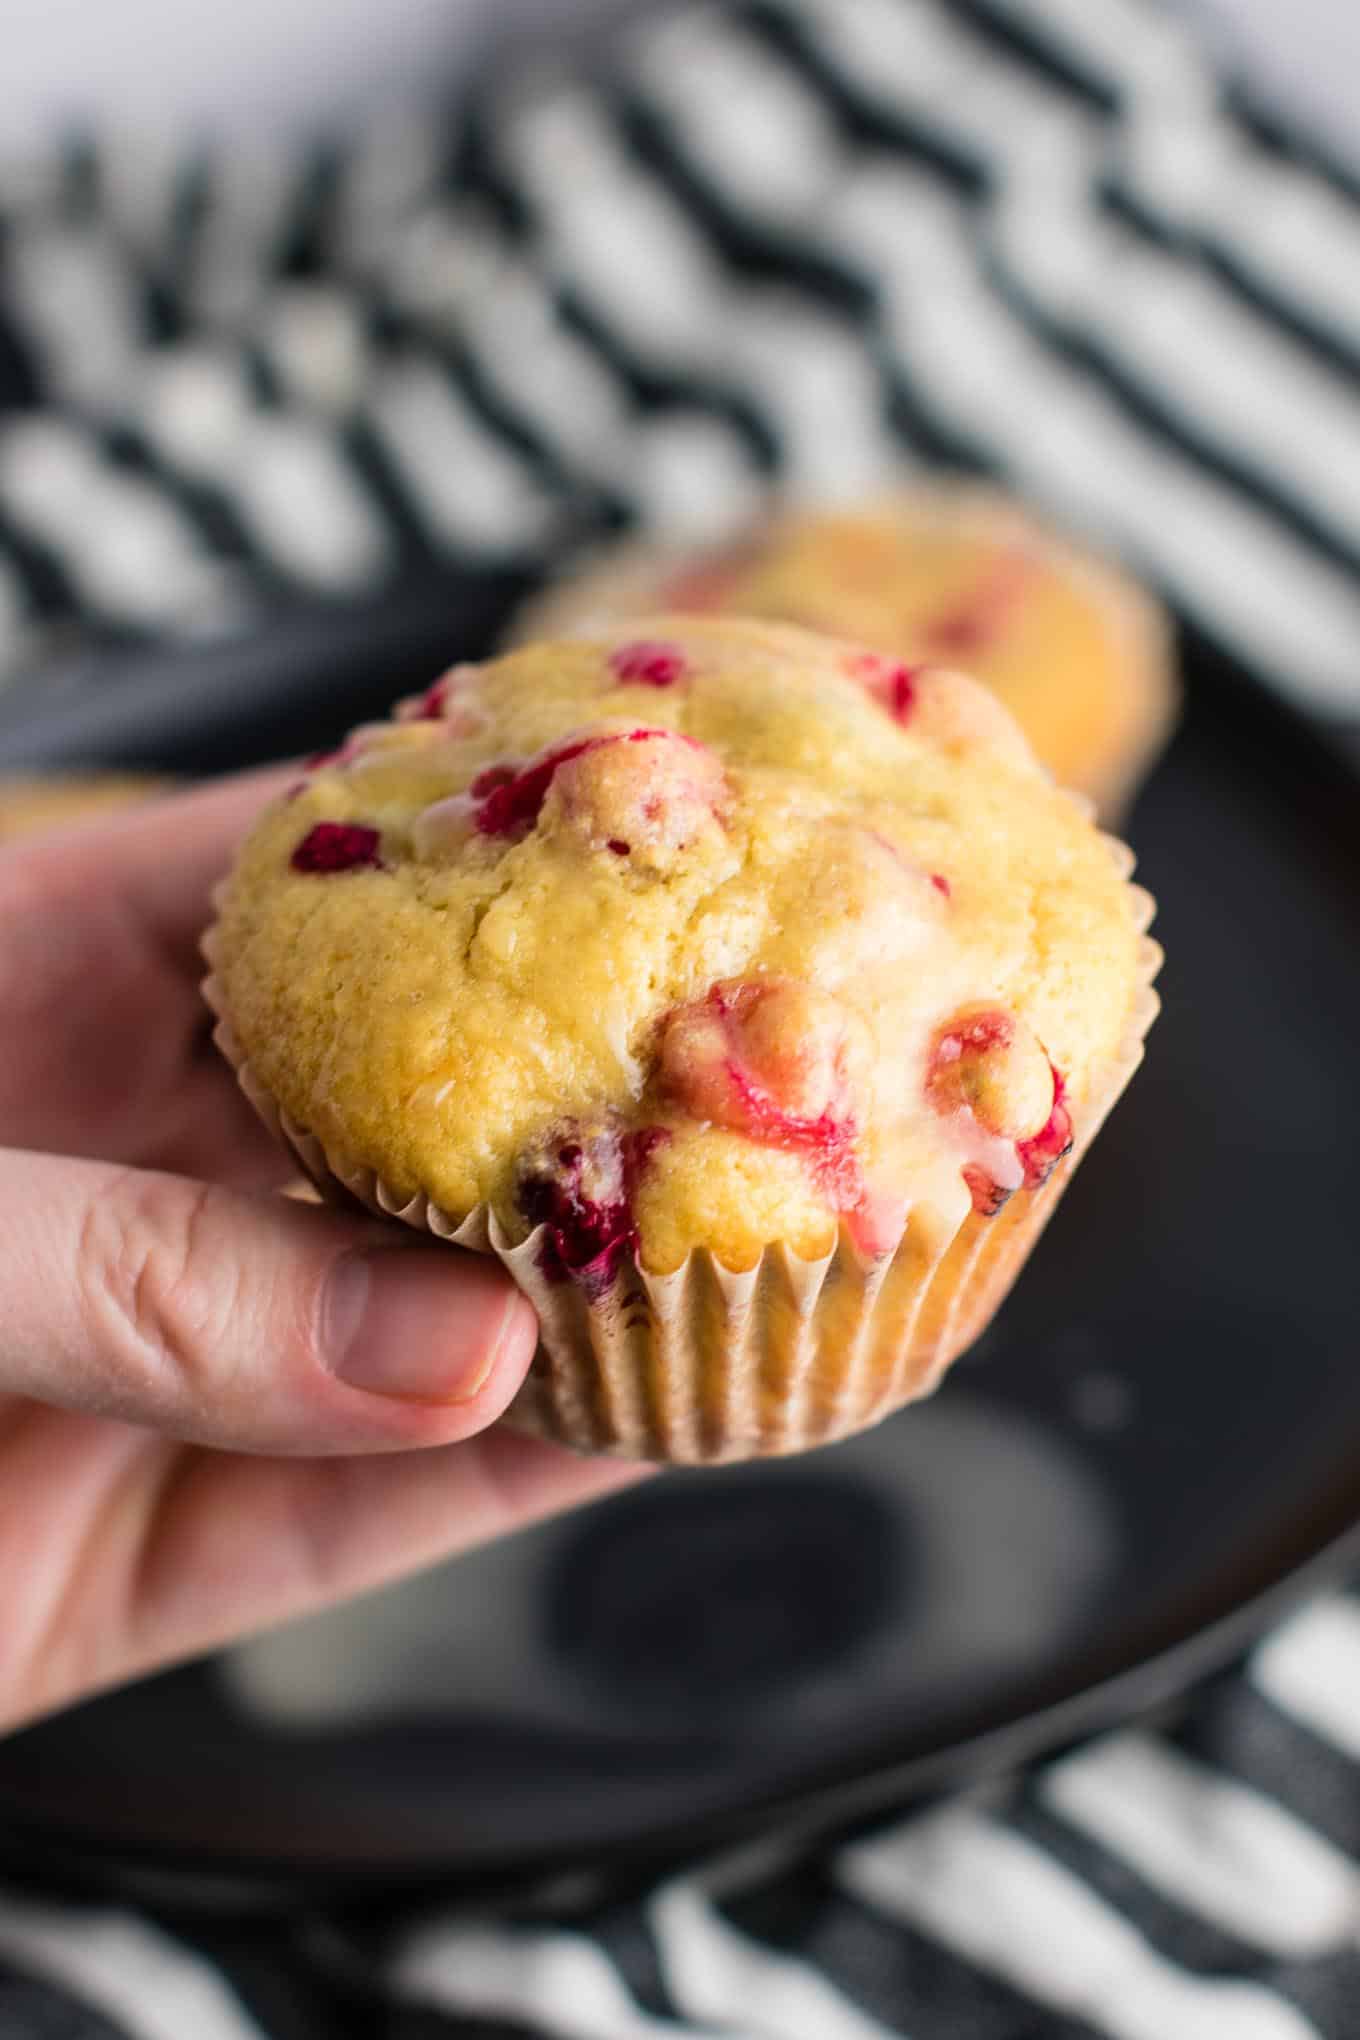 Healthy Cranberry Orange Muffins recipe made with greek yogurt and whole wheat pastry flour with a sweet orange glze. A healthier holiday breakfast or dessert! #breakfast #cranberry #muffins #cranberryorangemuffins #healthy